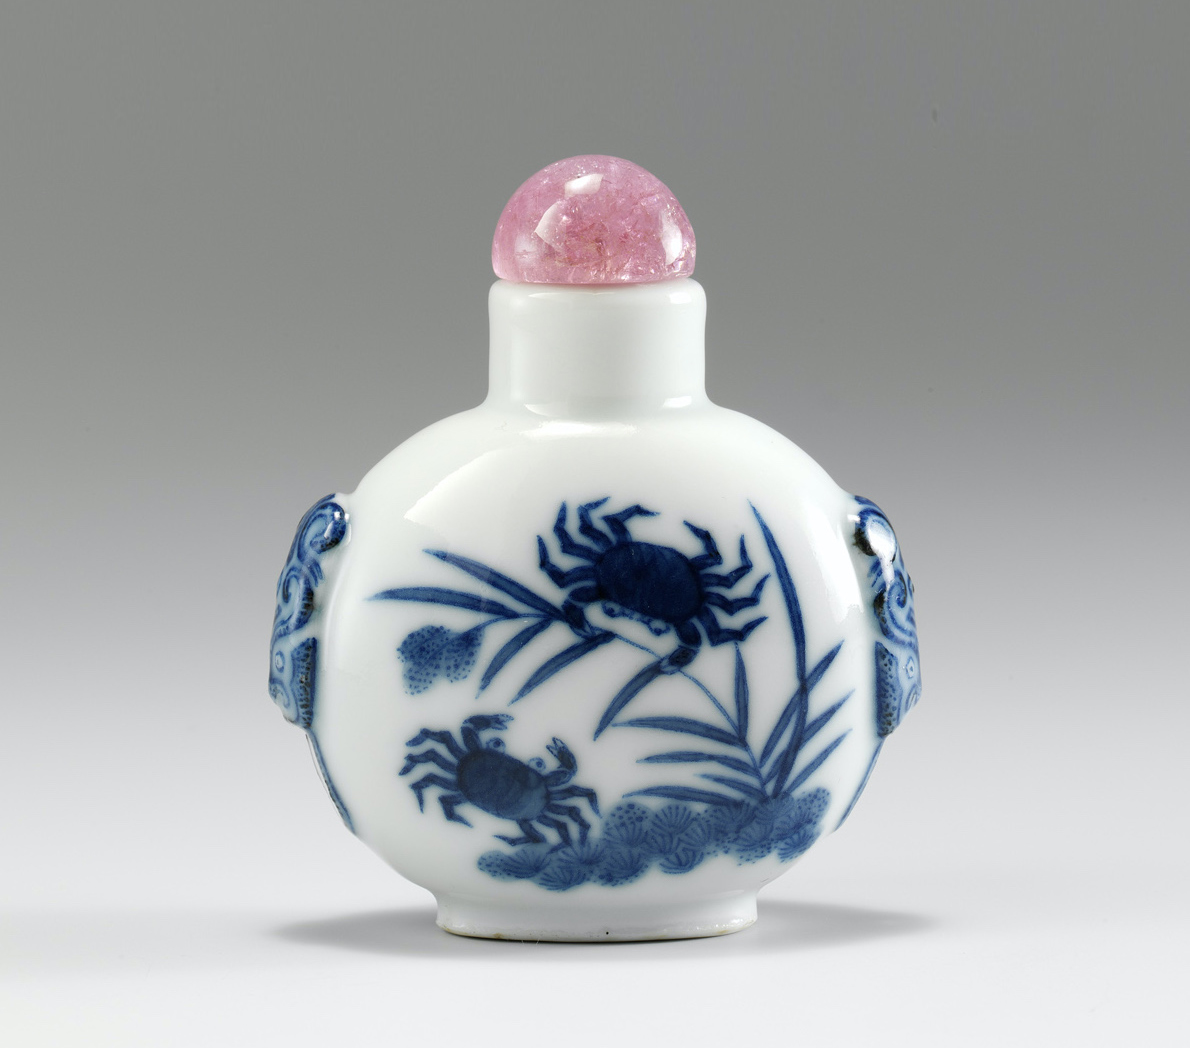 Blue and white porcelain with crabs and birds, 1820-1850